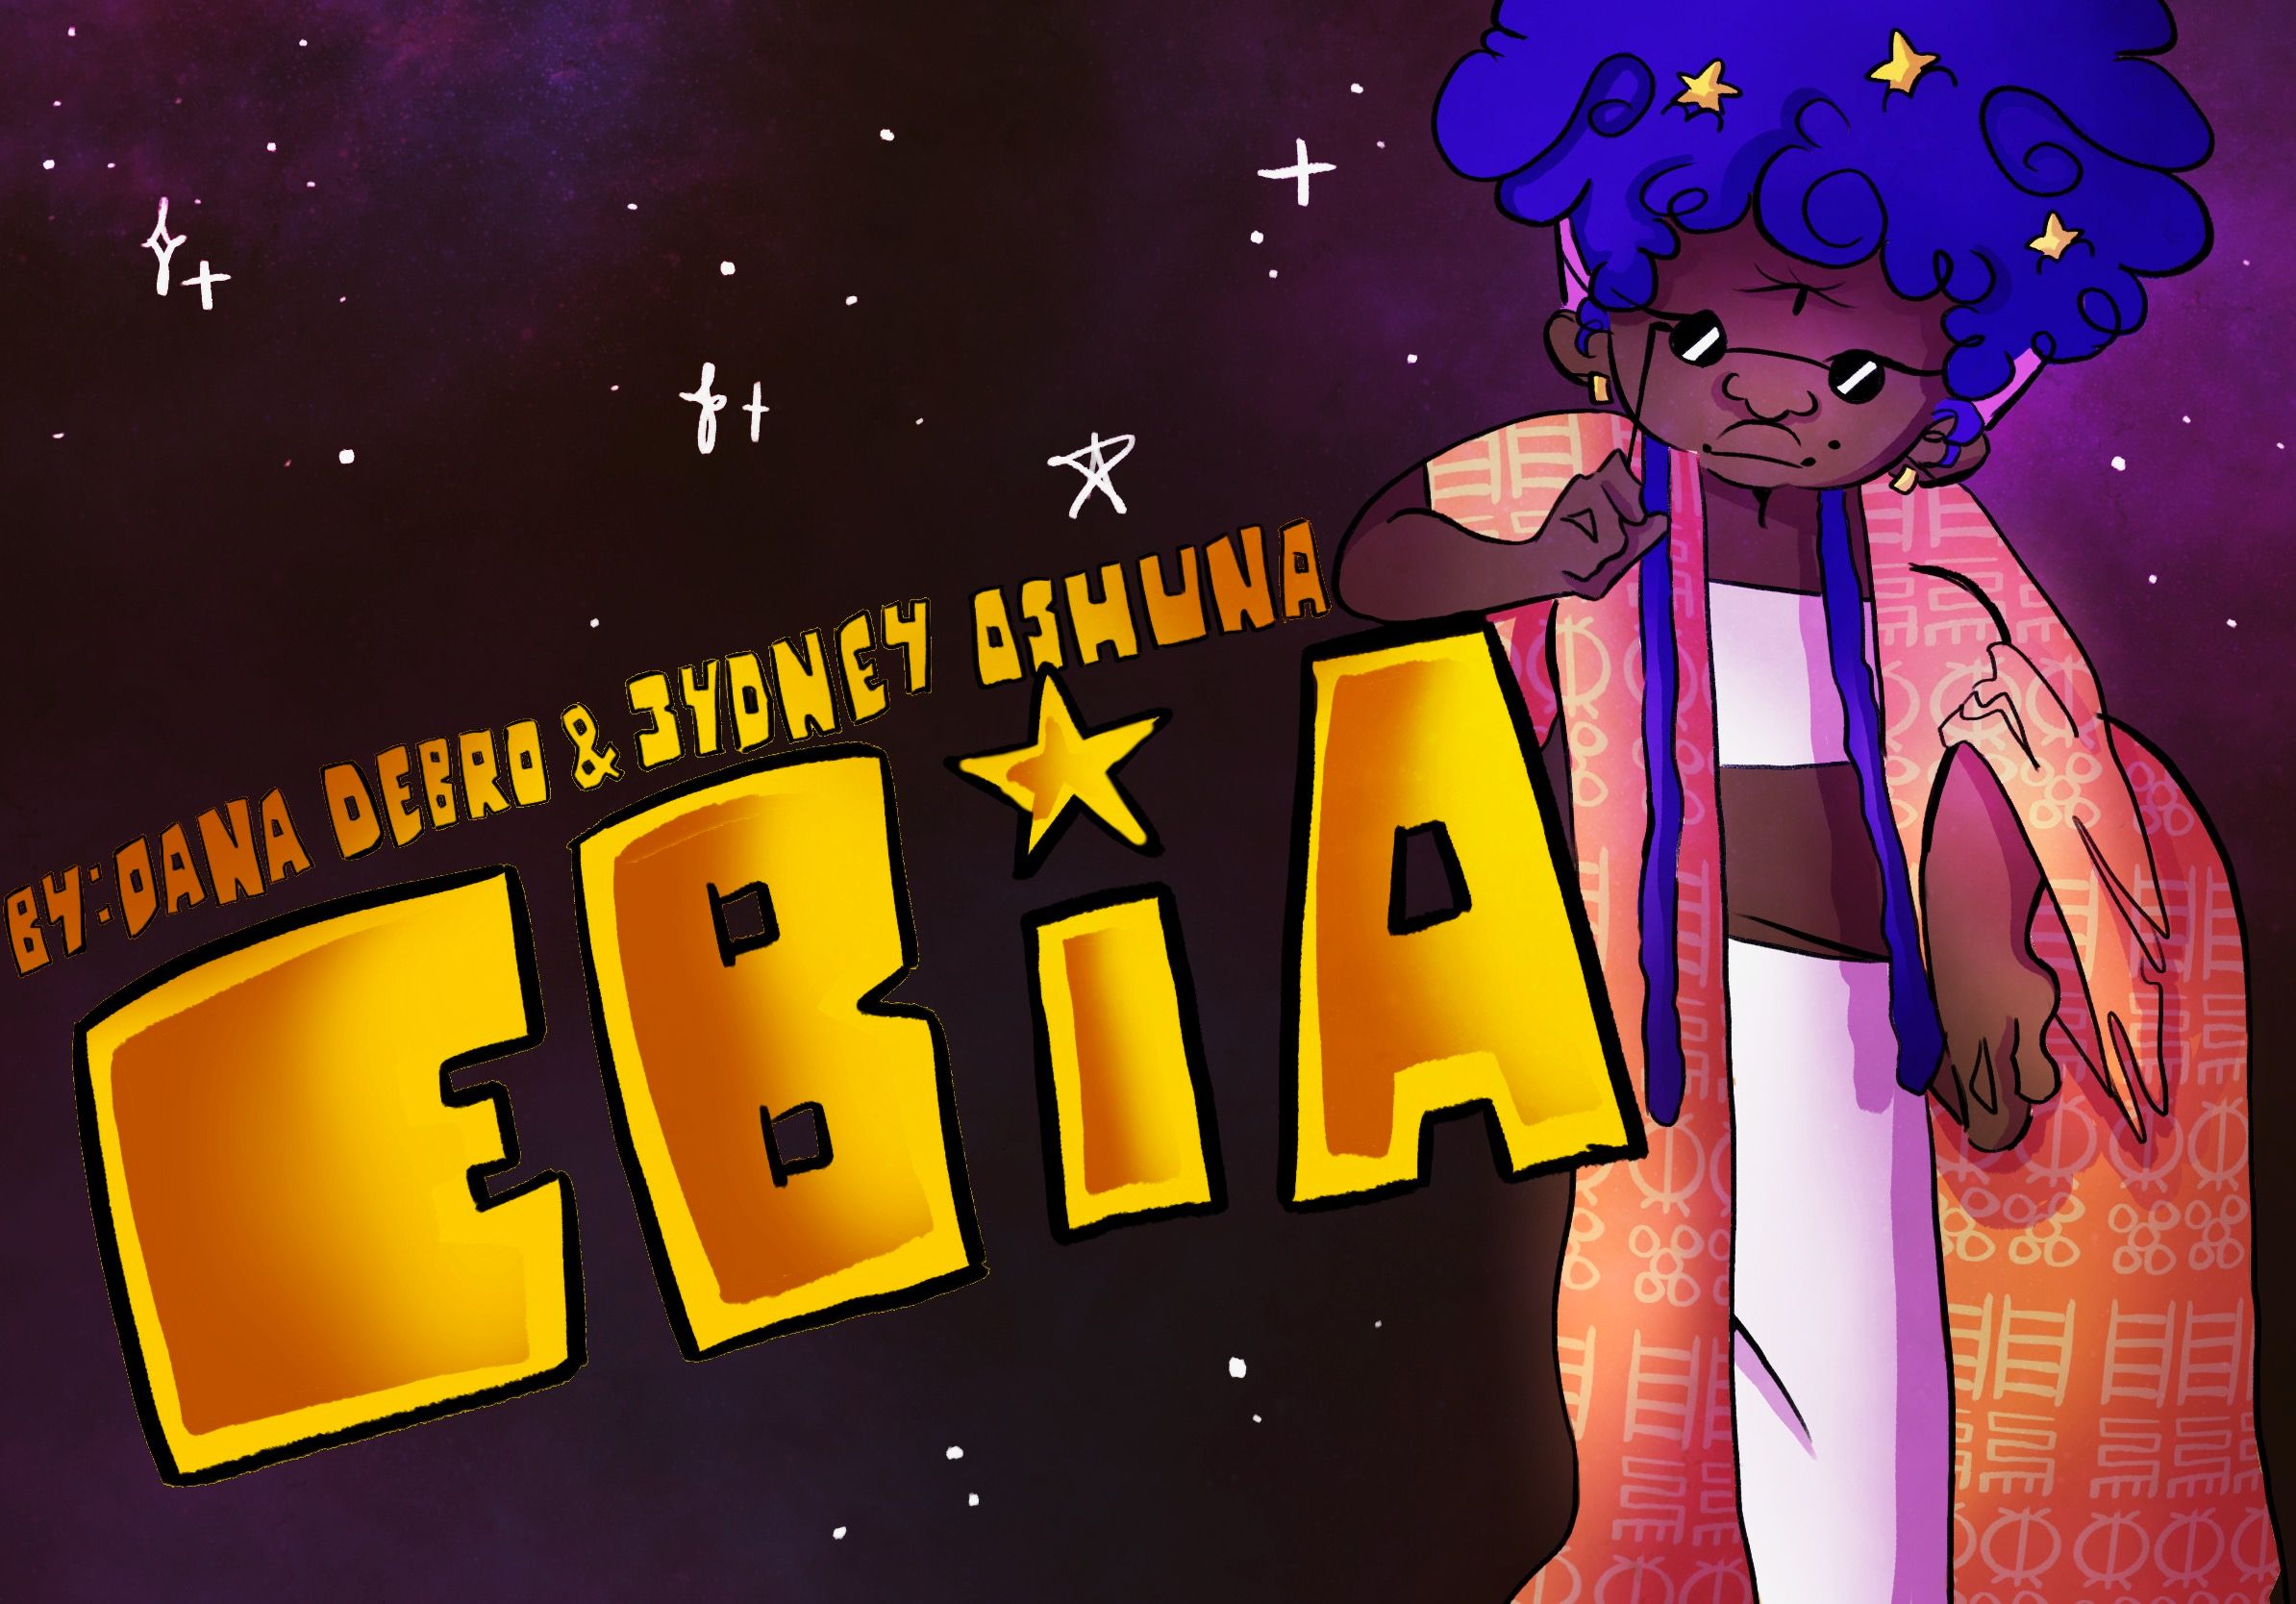 Text reads: EBIA by: Dana Debro and Sydney Oshuna. An animated character, Black with blue hair in a coral-colored, patterned robe, leans on the text “Ebia” holding sunglasses to their eyes.